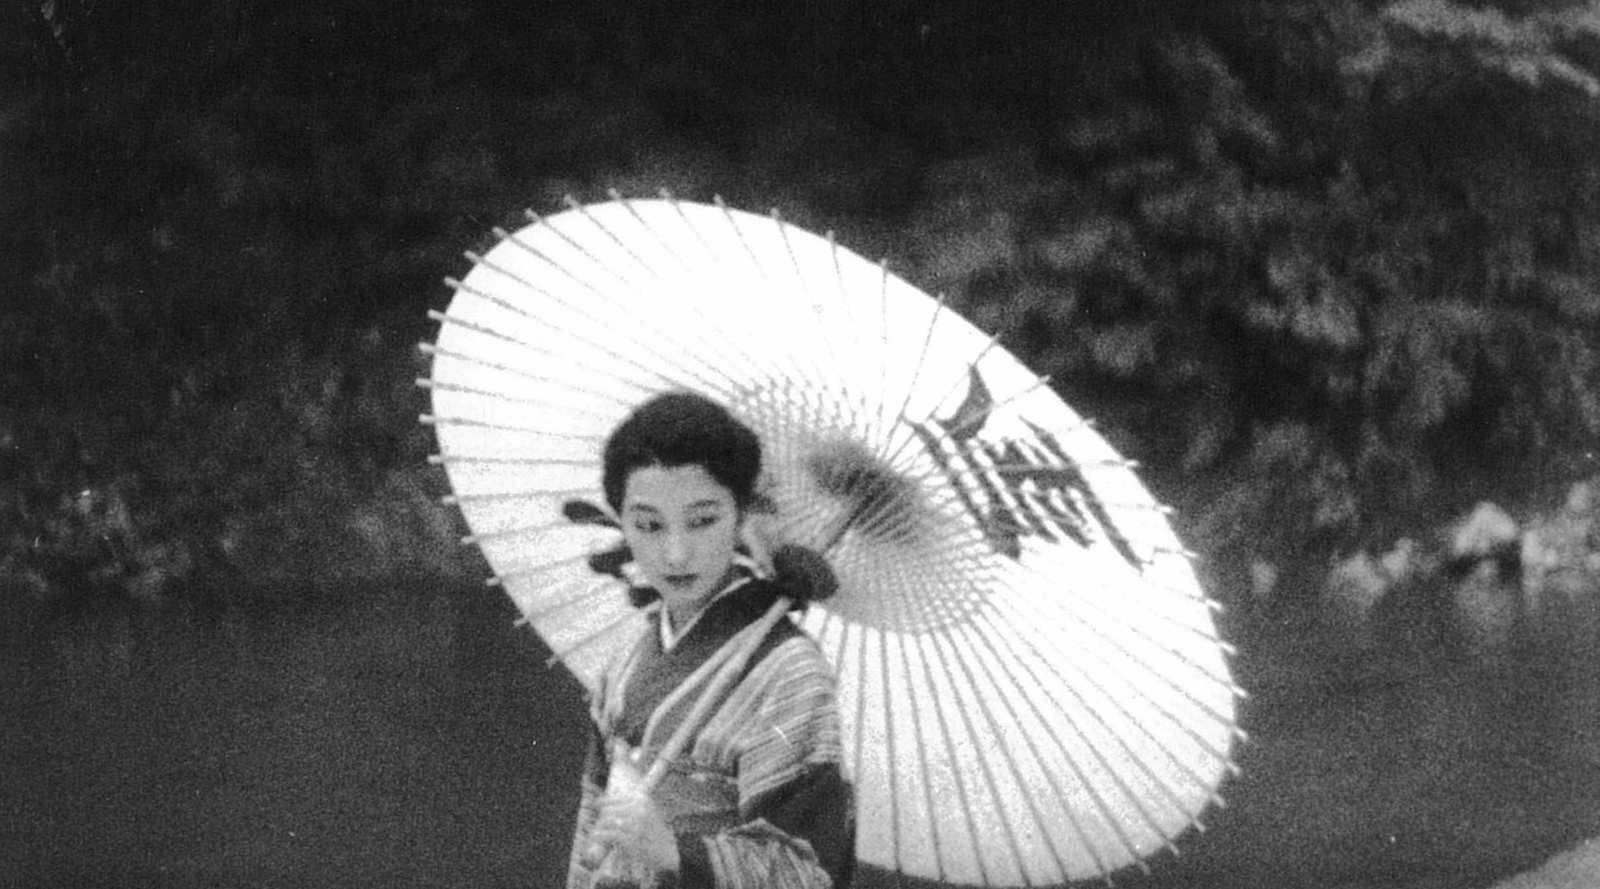 A black and white photo of a woman in classical Japanese clothing holding an elaborate parasol.